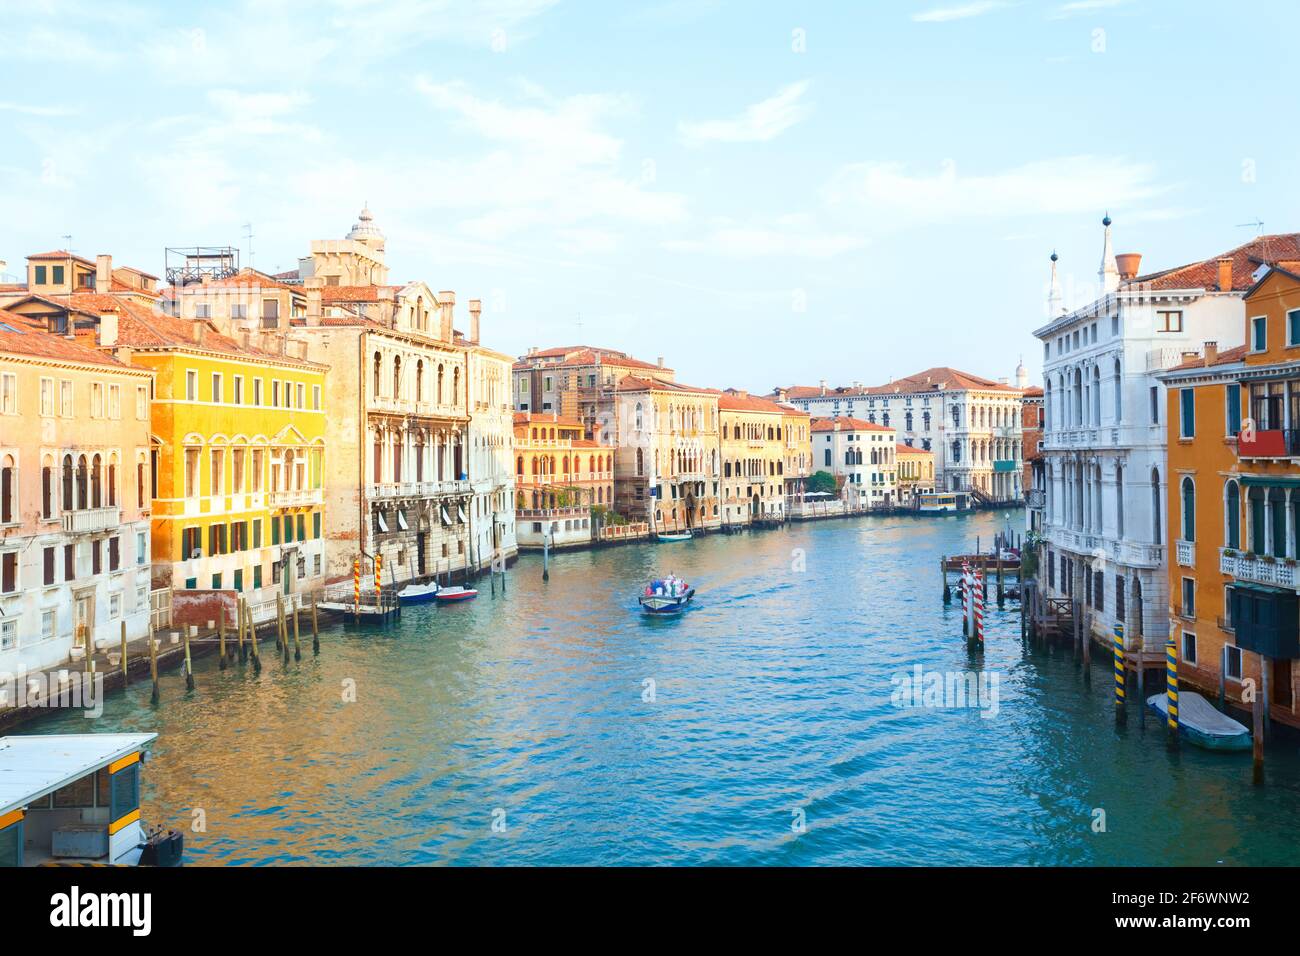 Grand Canal in Venice, Italy at early morning dawn with no crowds or people present Stock Photo